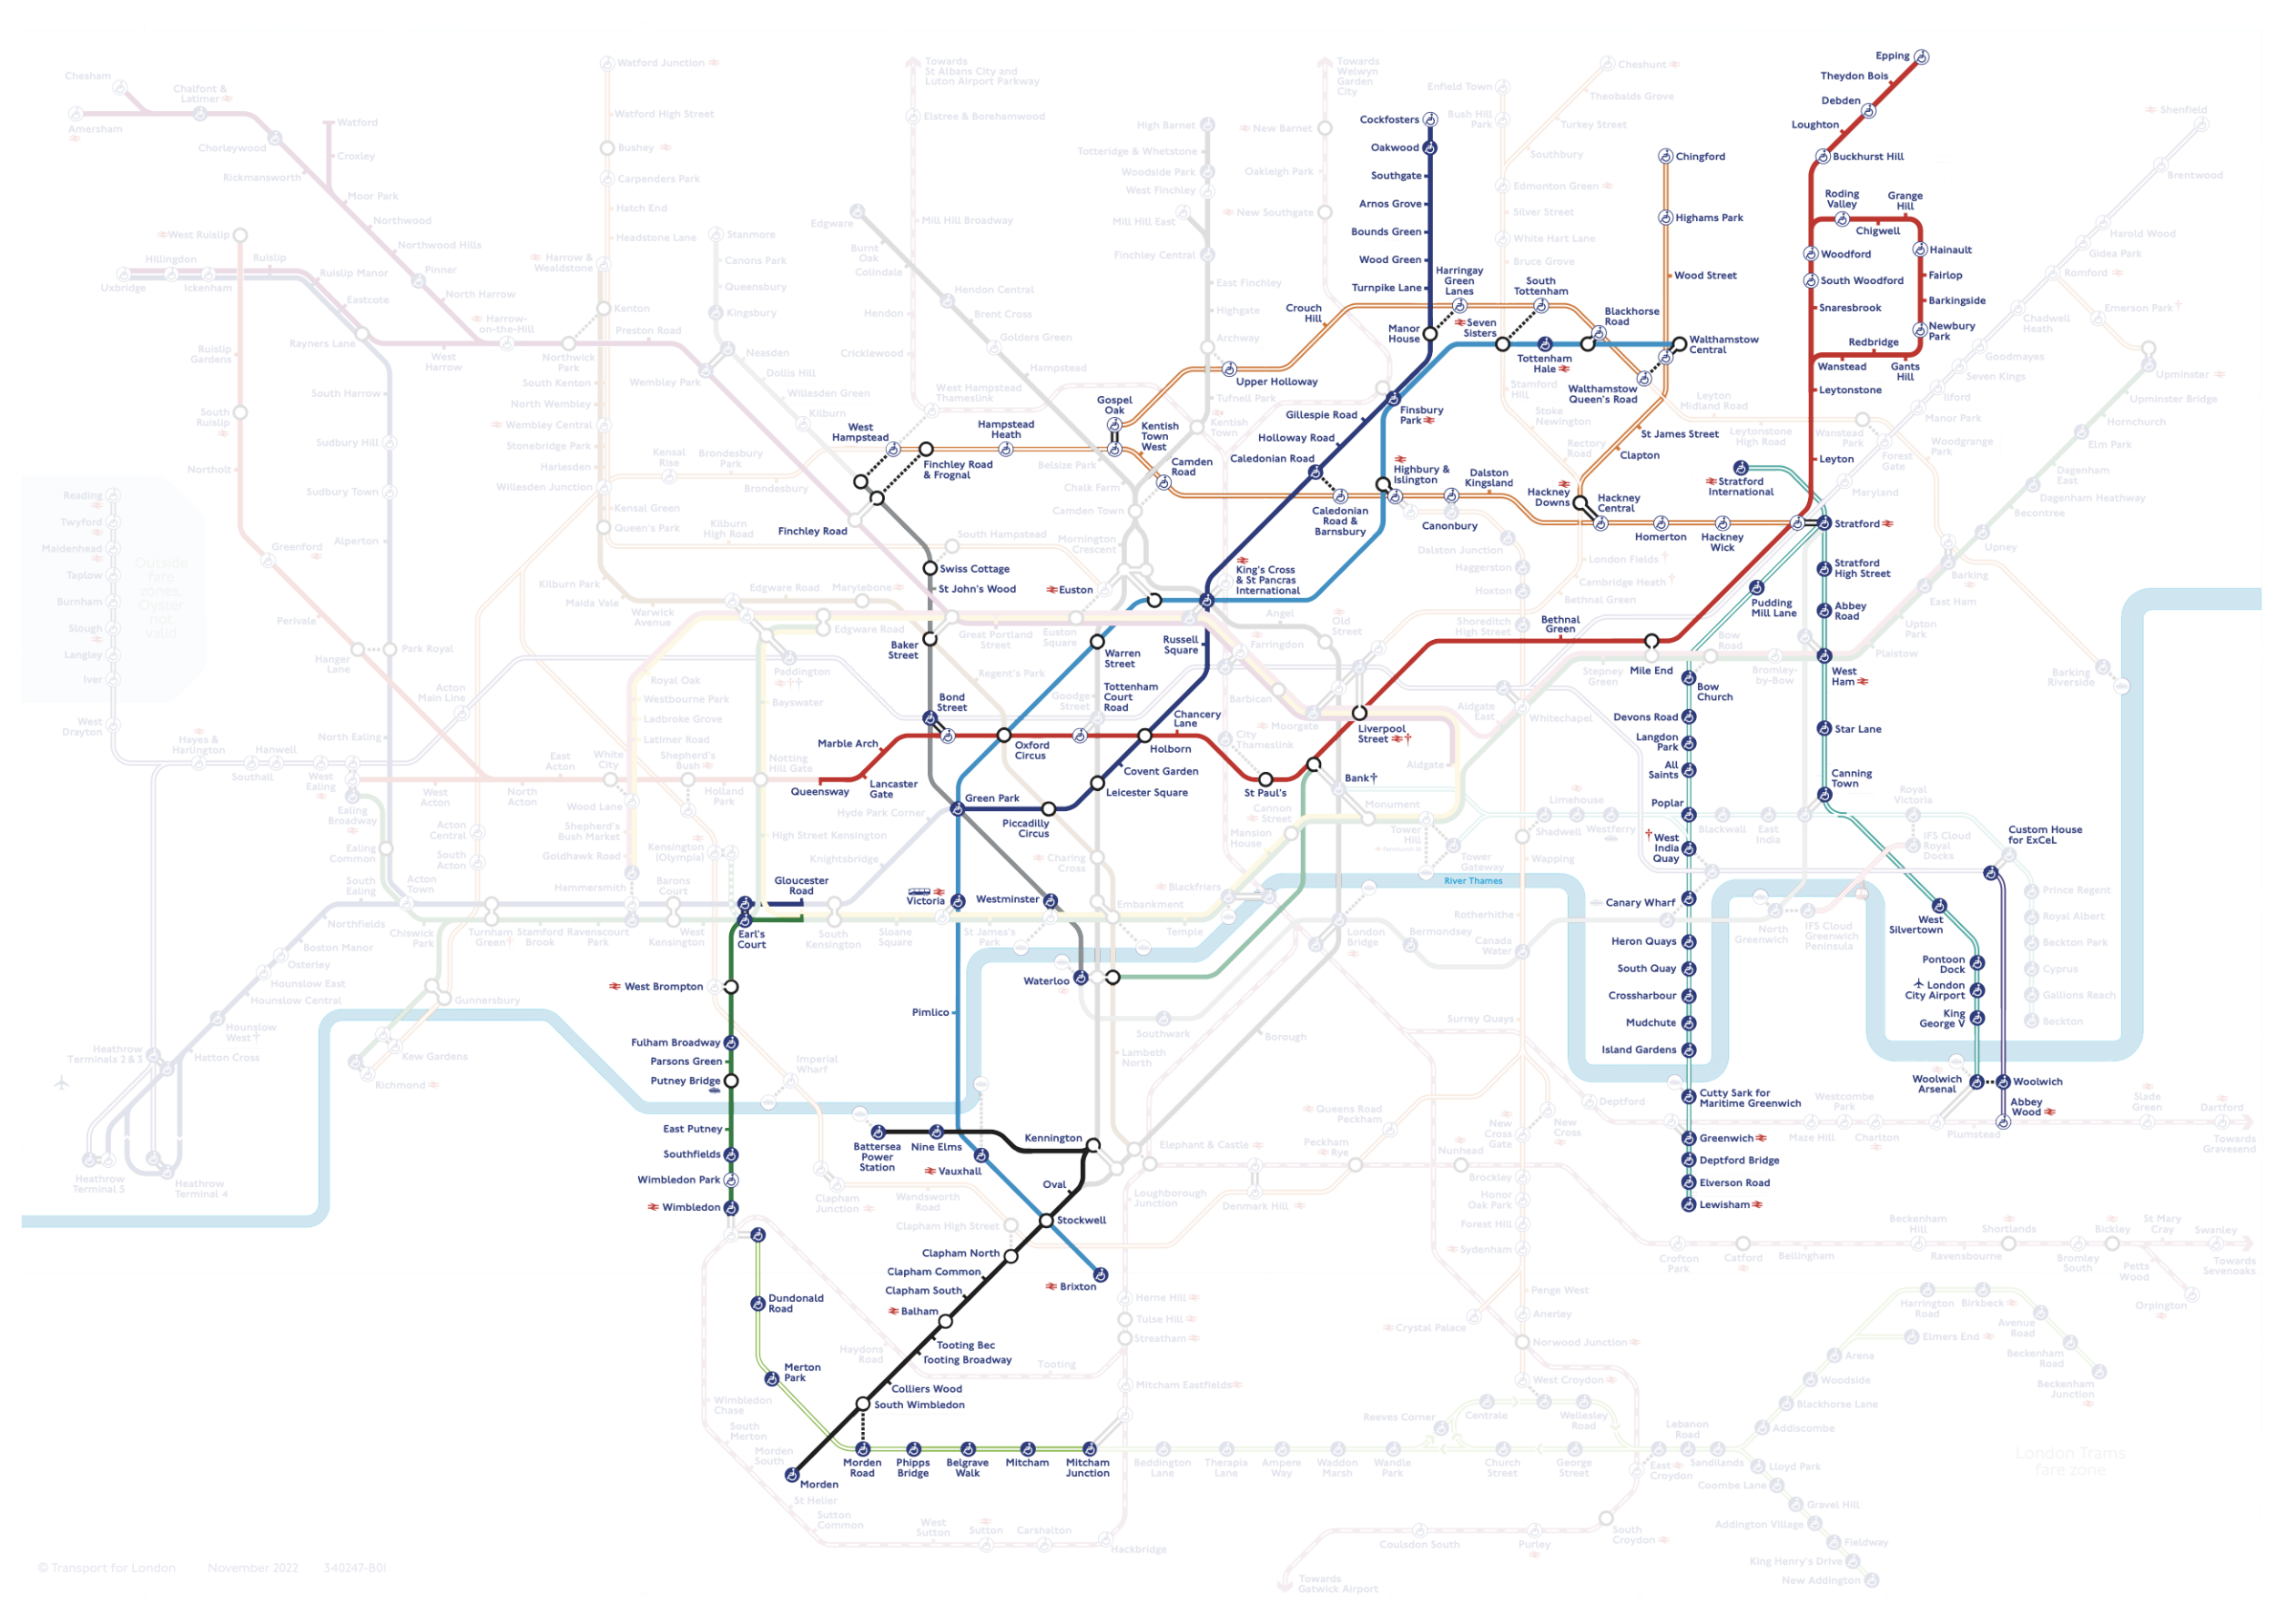 My London transport map showing that the areas that I've walked are slowly spreading across London